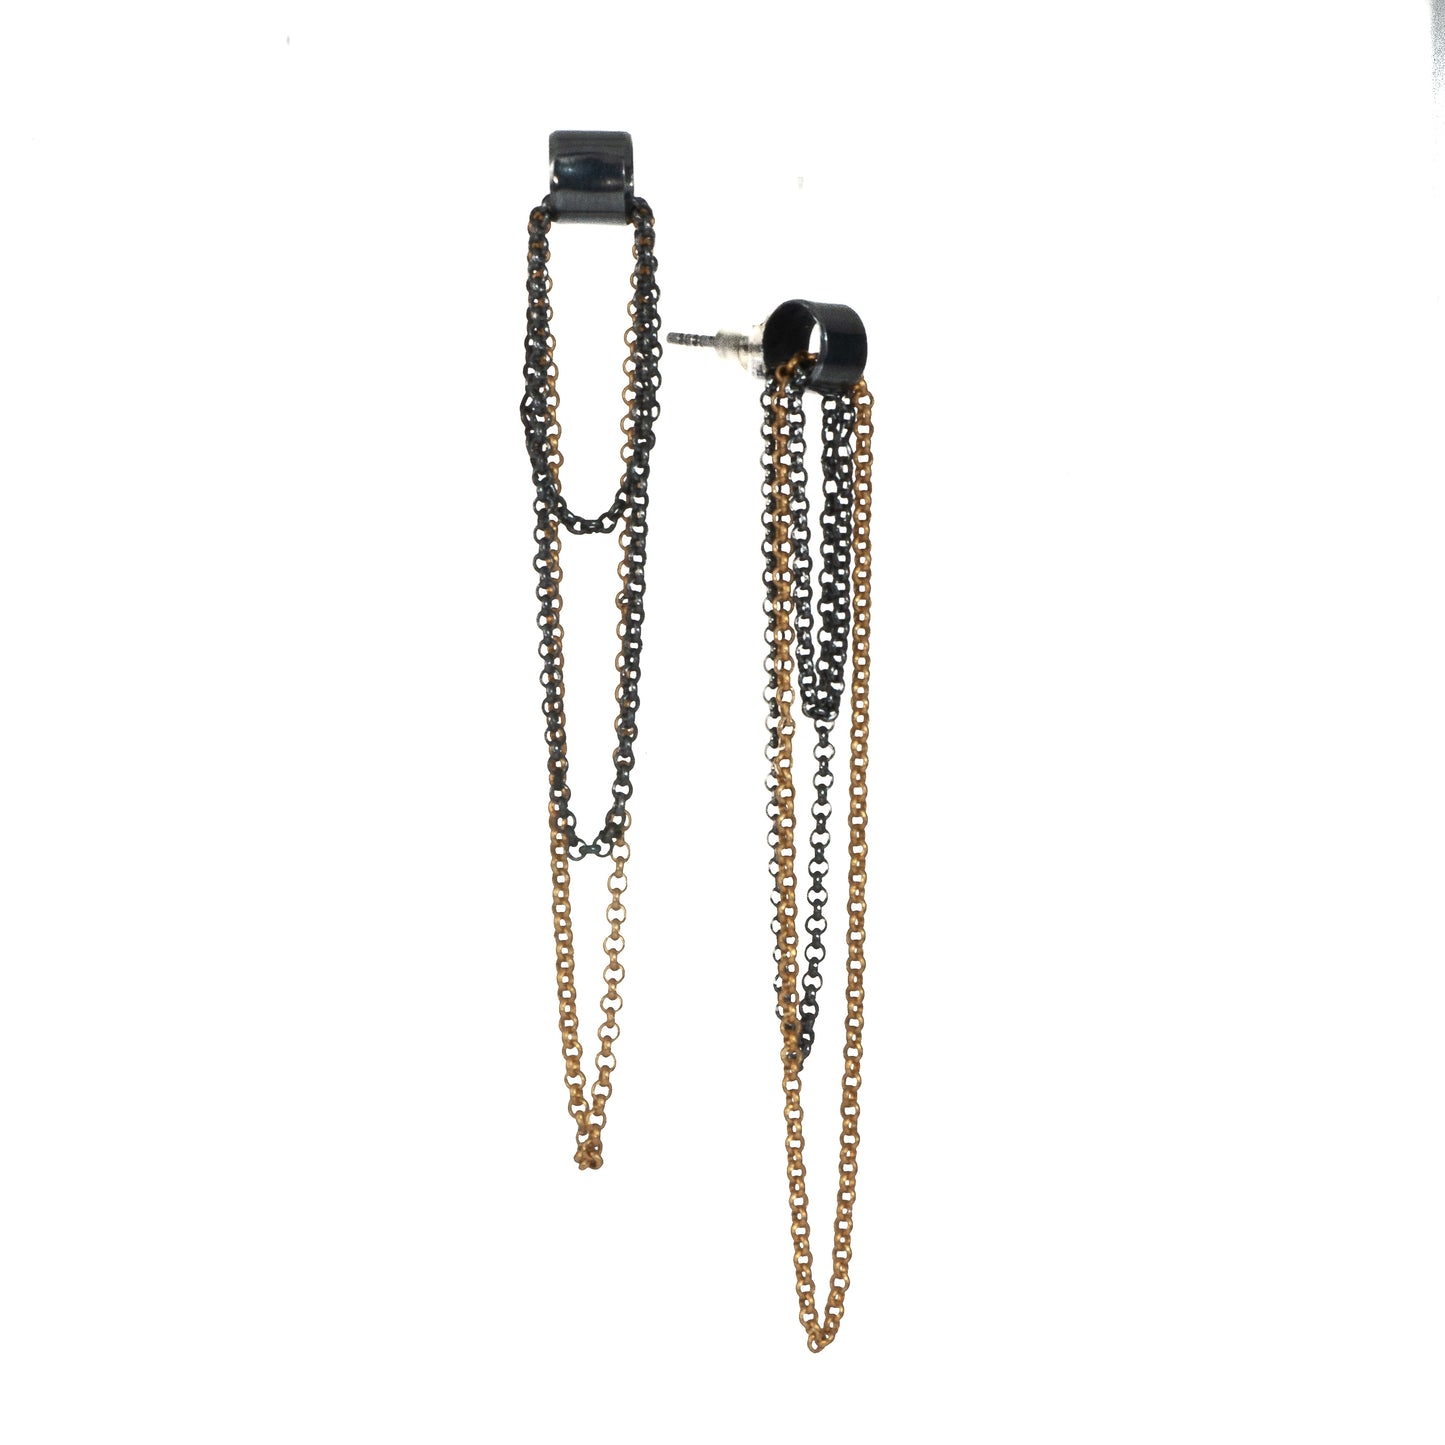 Mysterium Collection Black and Gold Chain (Sml)